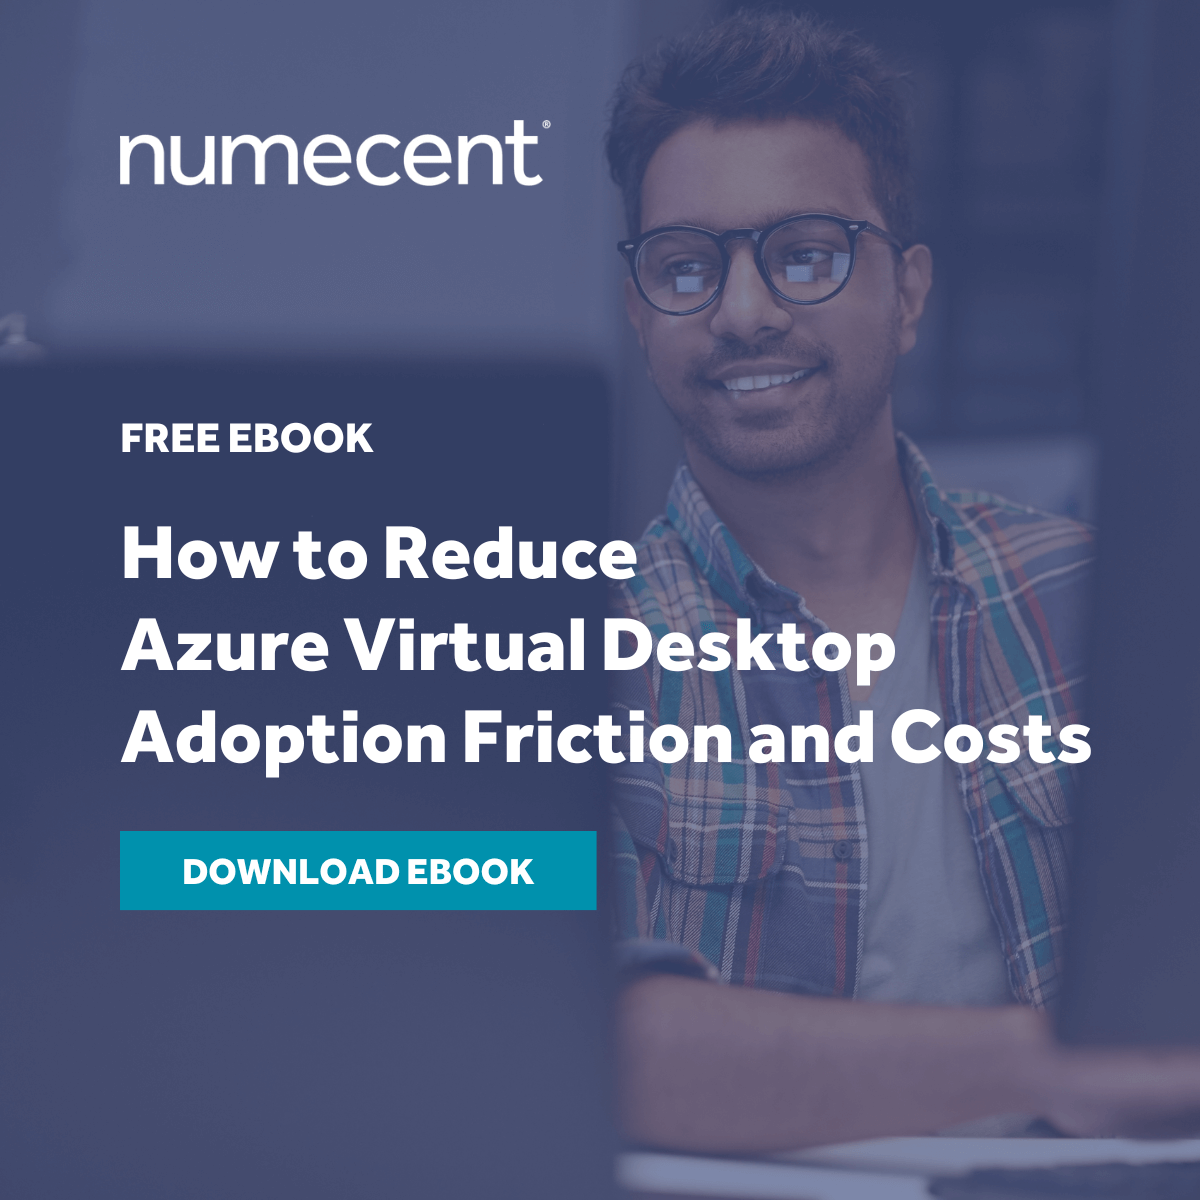 eBook titled "How to Reduce Azure Virtual Desktop Adoption Friction and Costs"